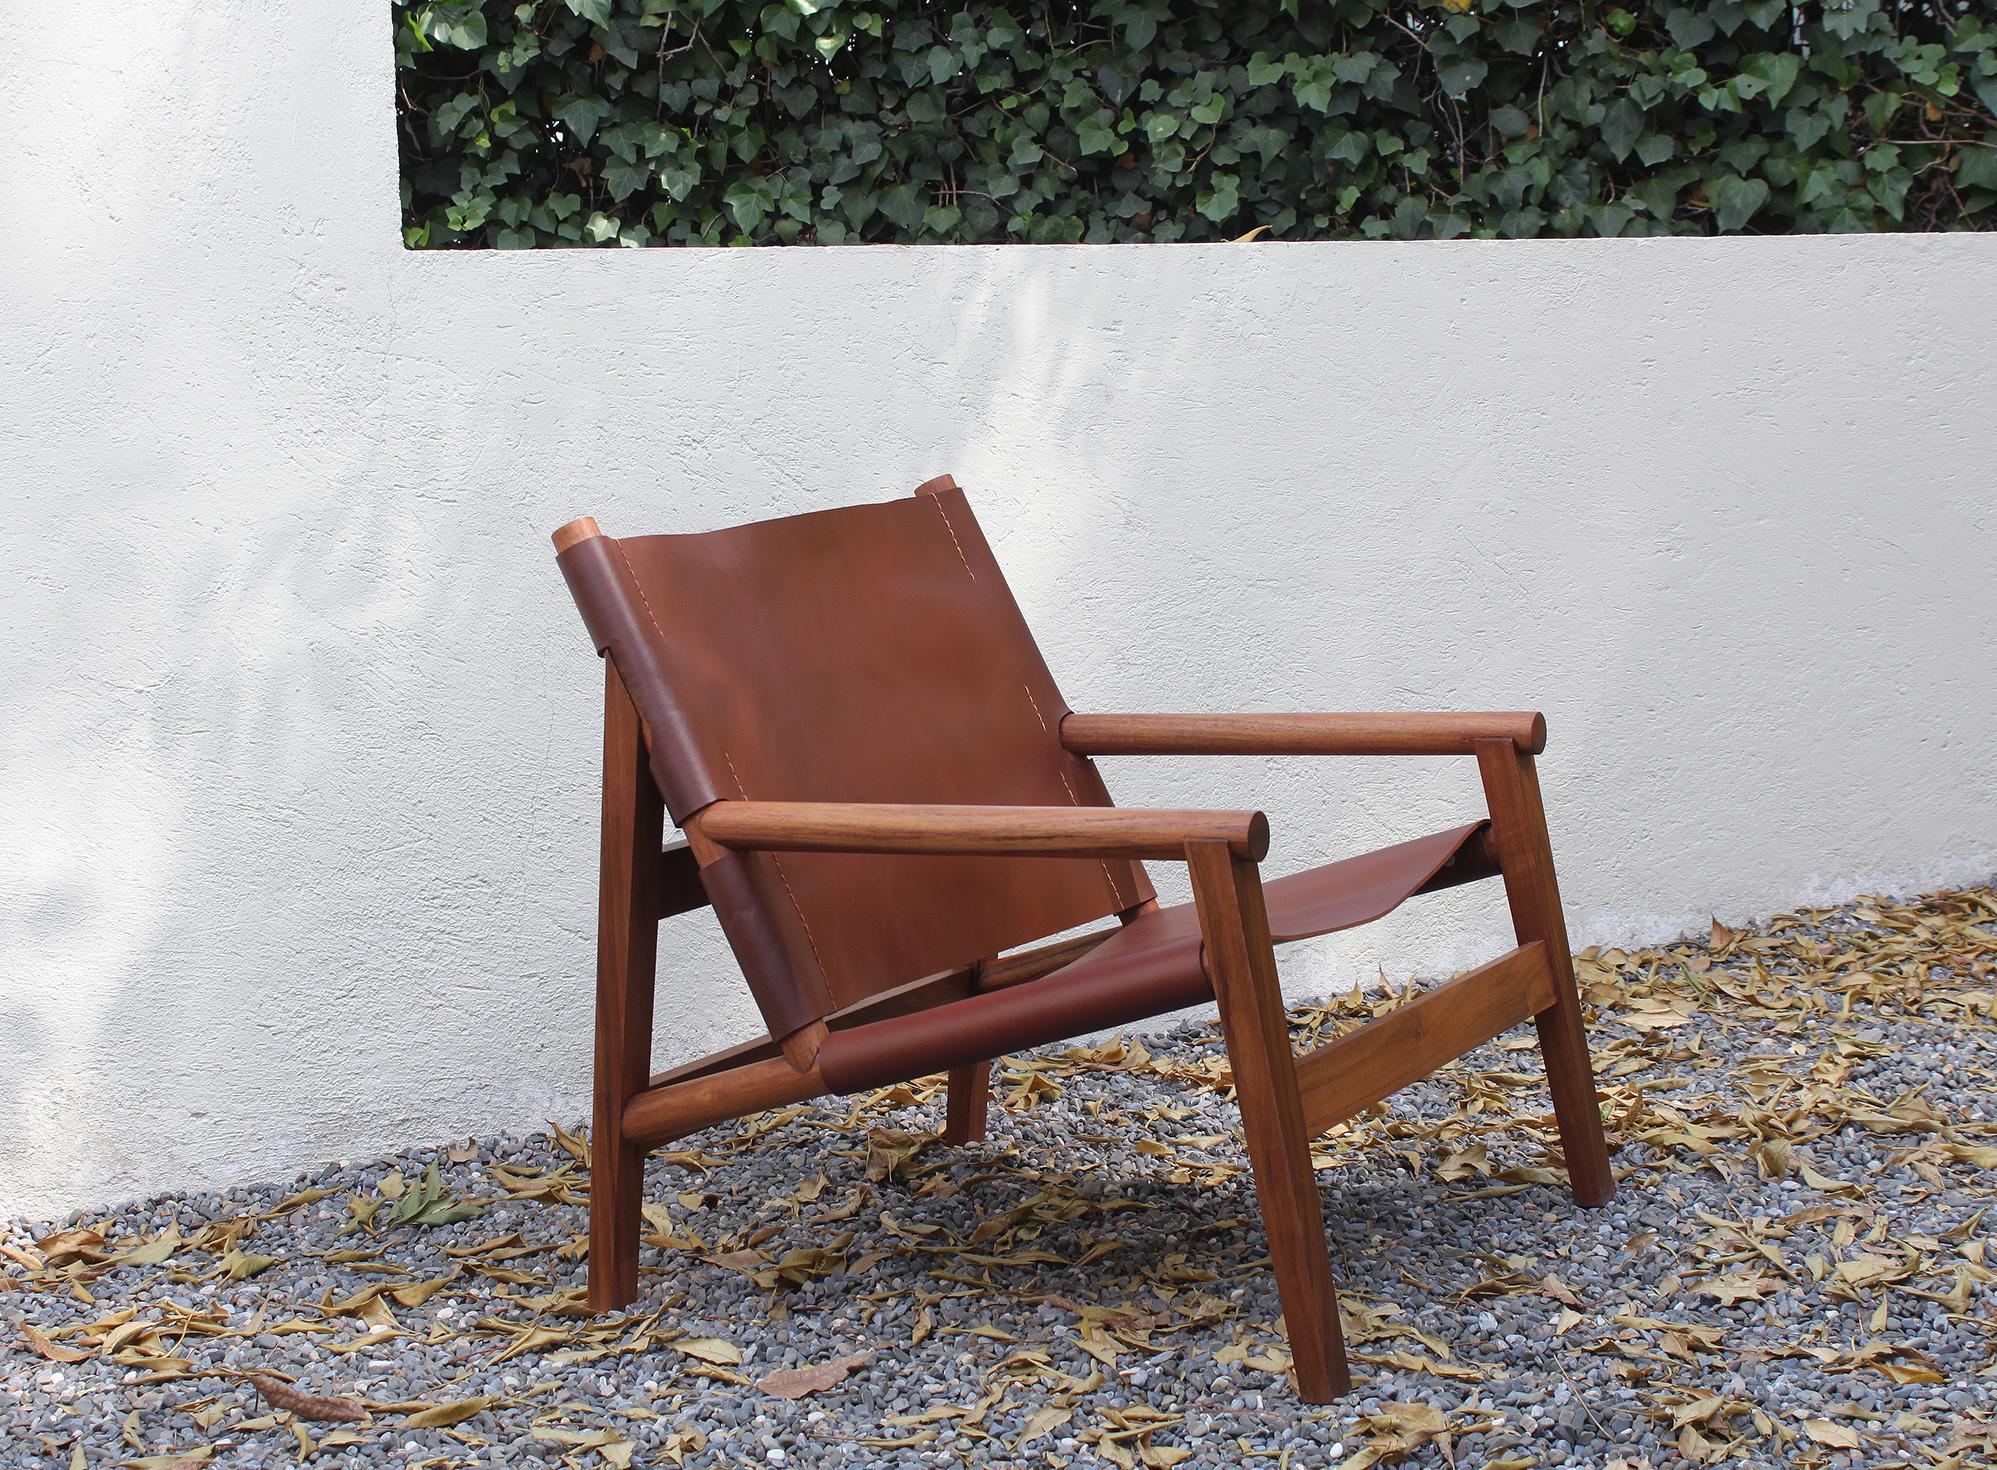 La Colima Chair, Maria Beckmann, Represented by Tuleste Factory For Sale 7